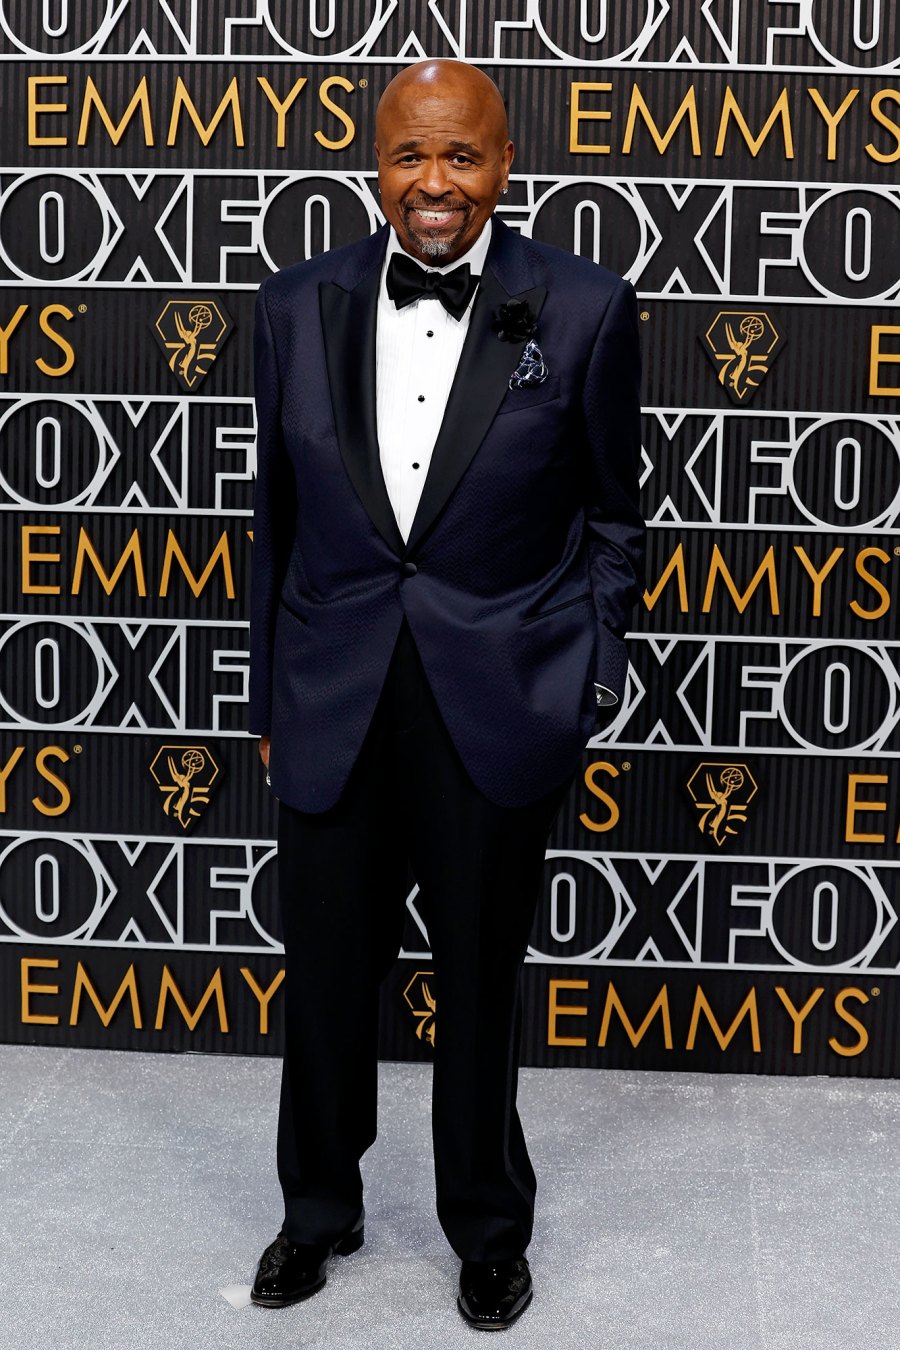 William Stanford Davis Abbott Elementary Cast Trades in School Books for Red Carpet Looks at the 2023 Emmy Awards